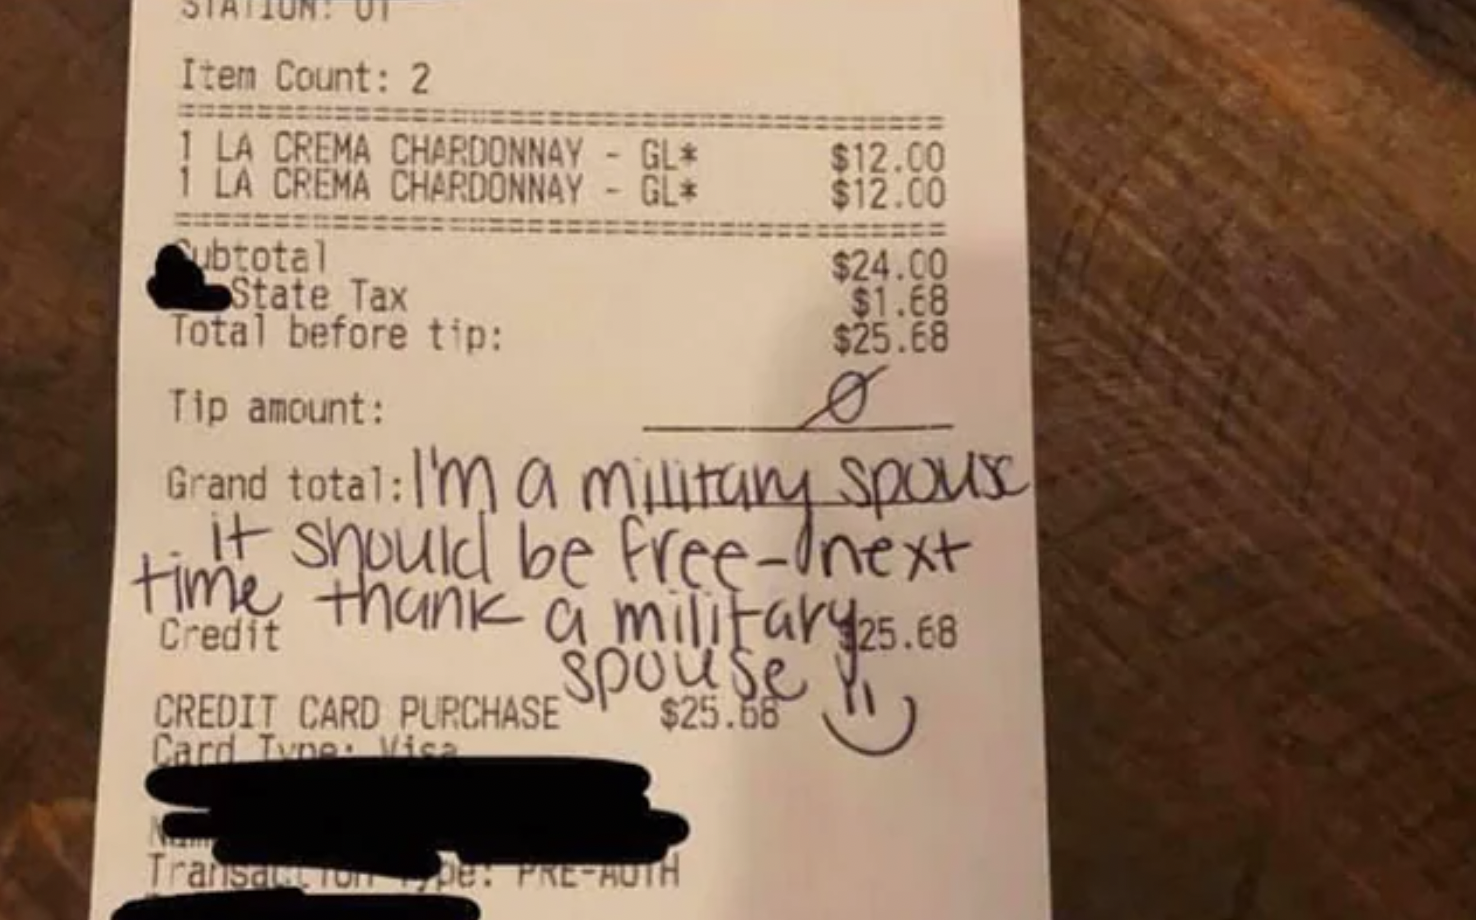 military wife receipt - Item Count 2 1 La Crema Chardonnay Gl 1 La Crema Chardonnay Gl Subtotal State Tax Total before tip Tip amount Grand totalI'm a military spouse it should be freenext time thank a military 25.68 spouse & $25.66 Credit Card Purchase C